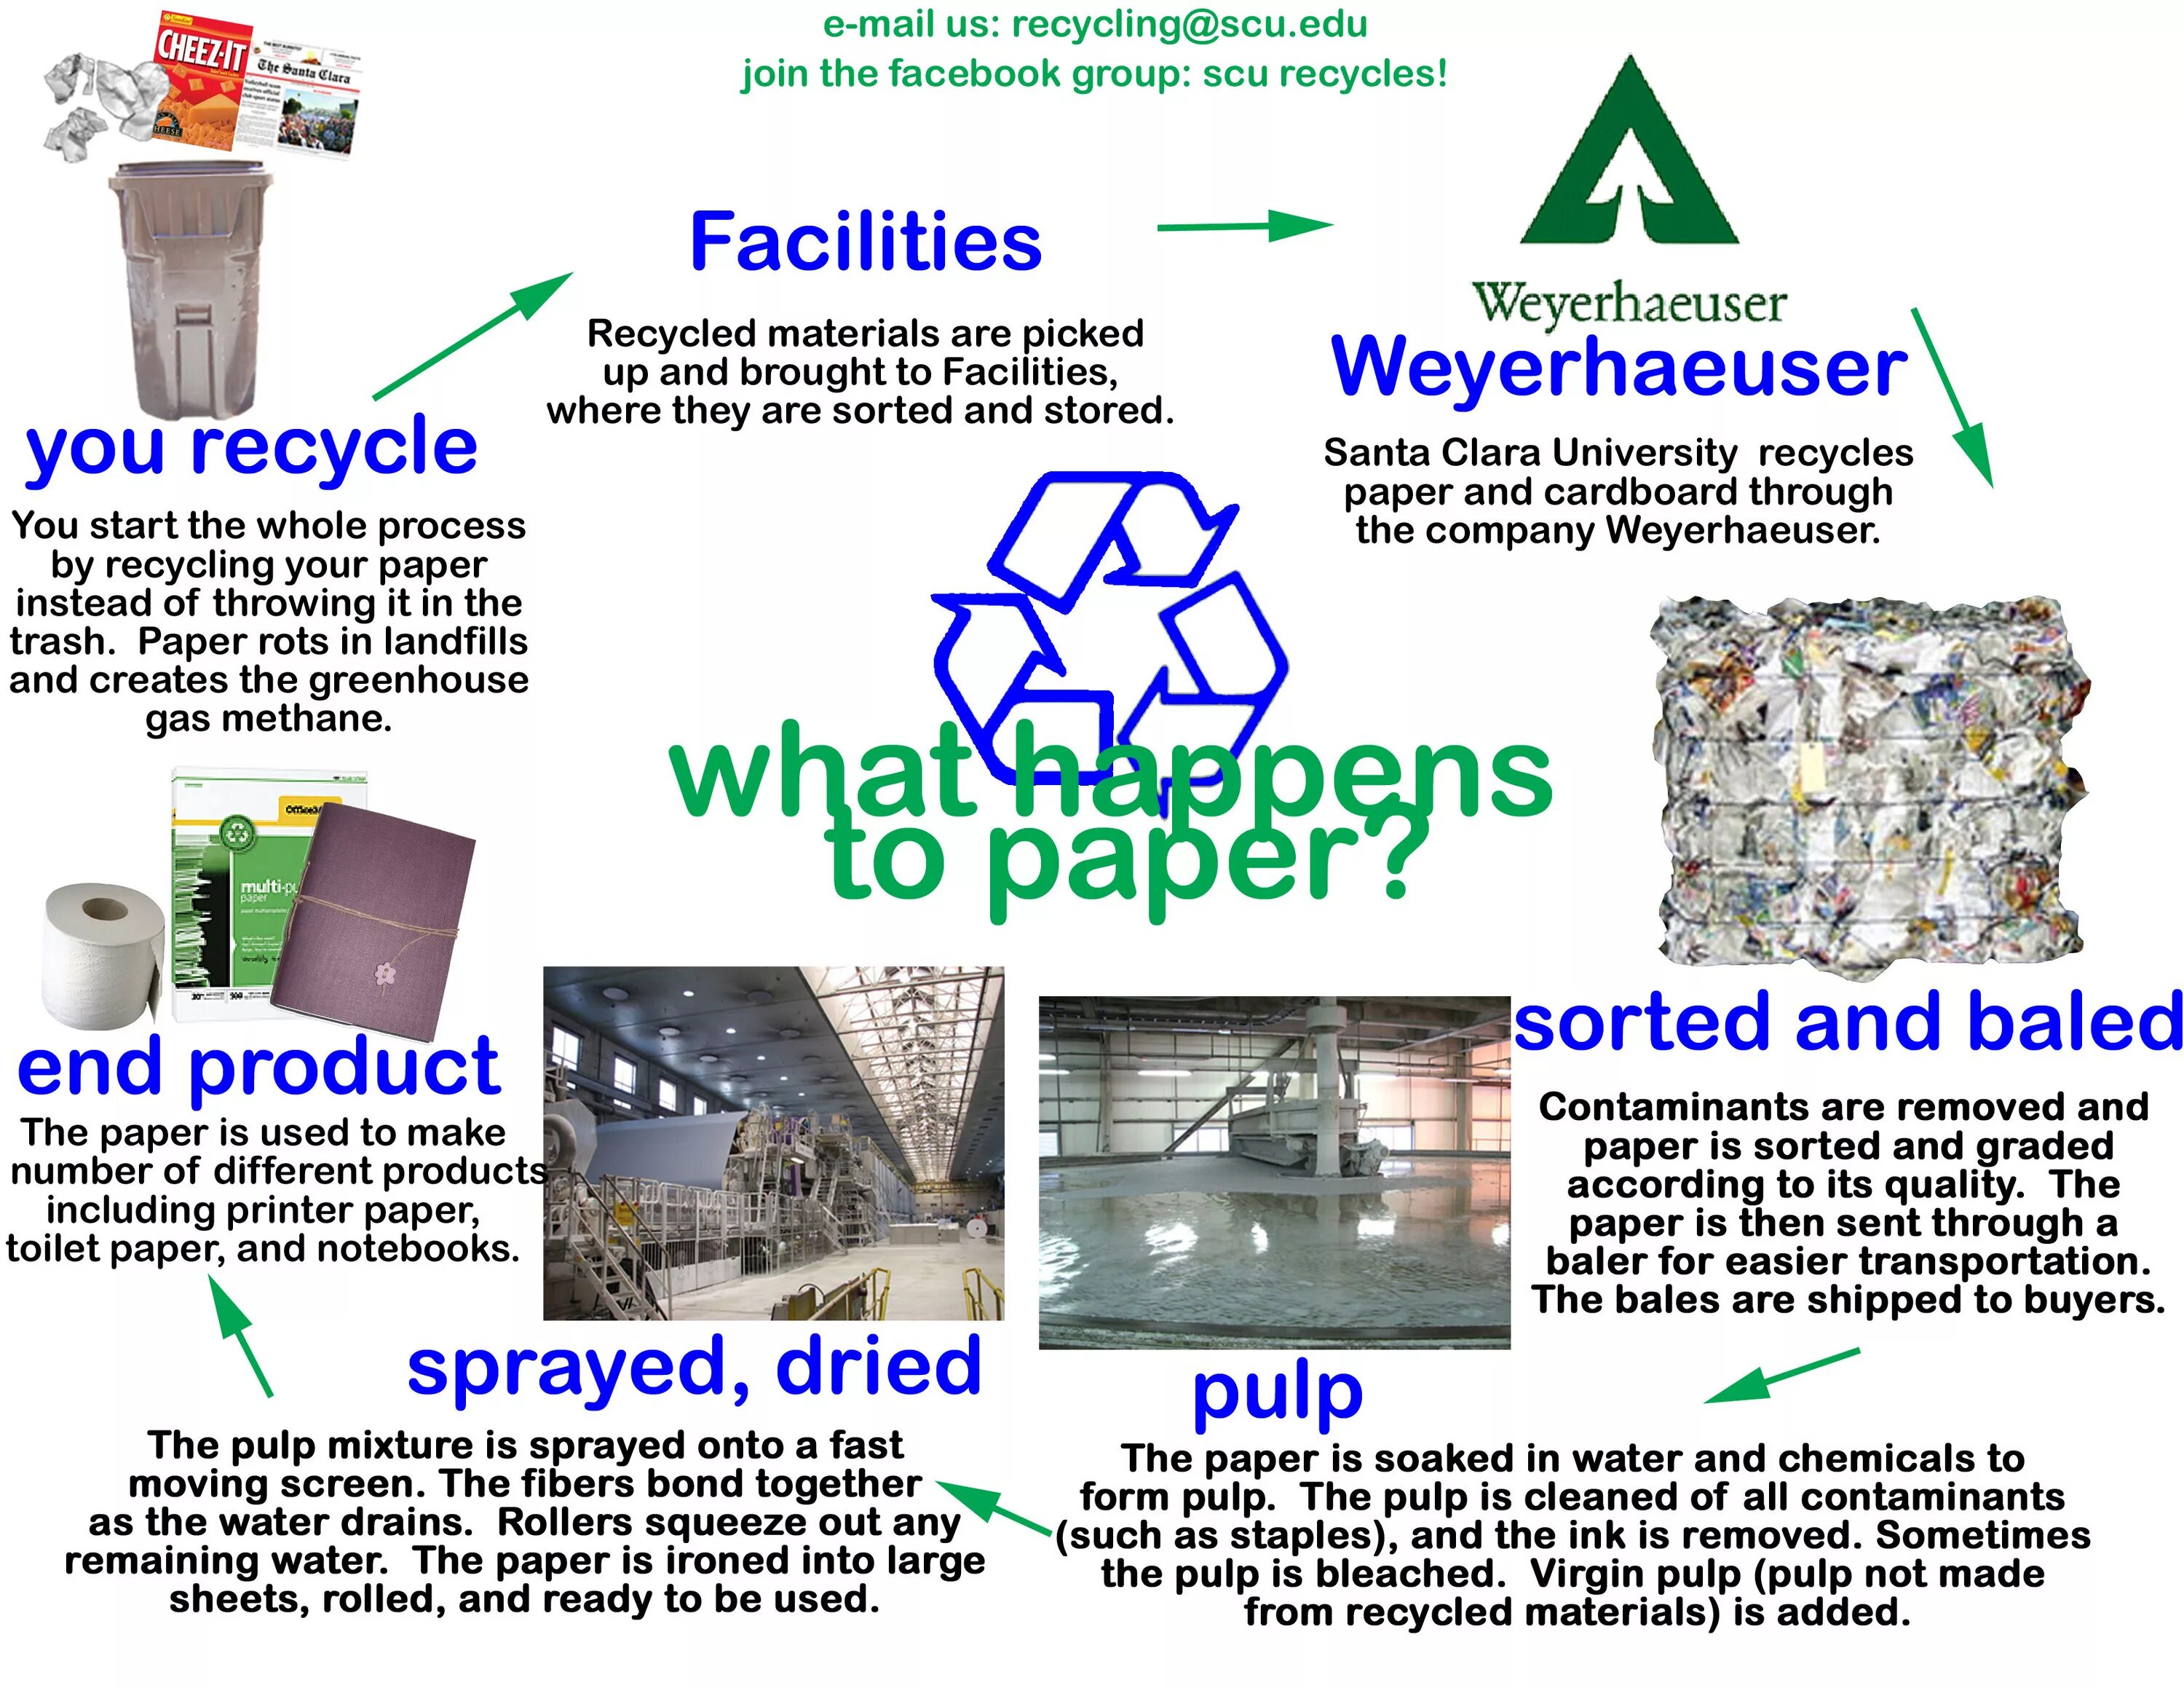 We can recycle. Recycling примеры. Предложения с recycle. Recycle диаграмма. What materials recycle.